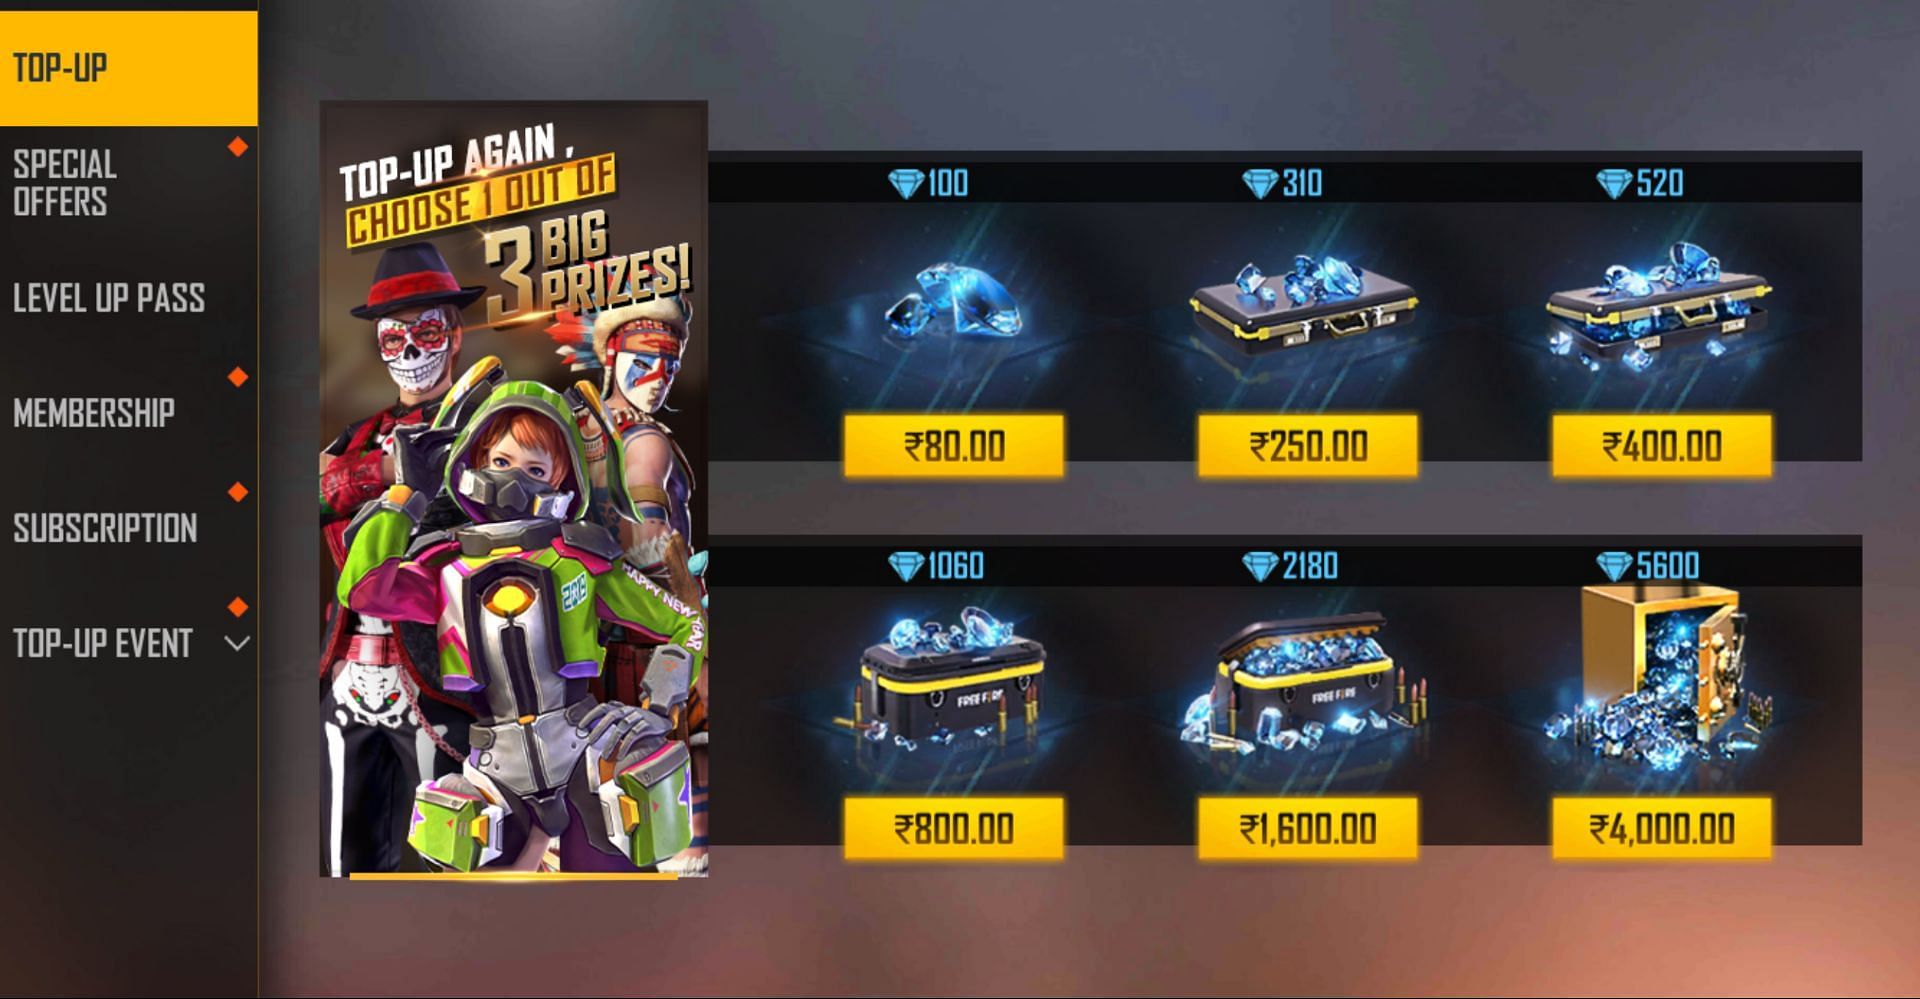 Users can select any one of the items (Image via Garena)